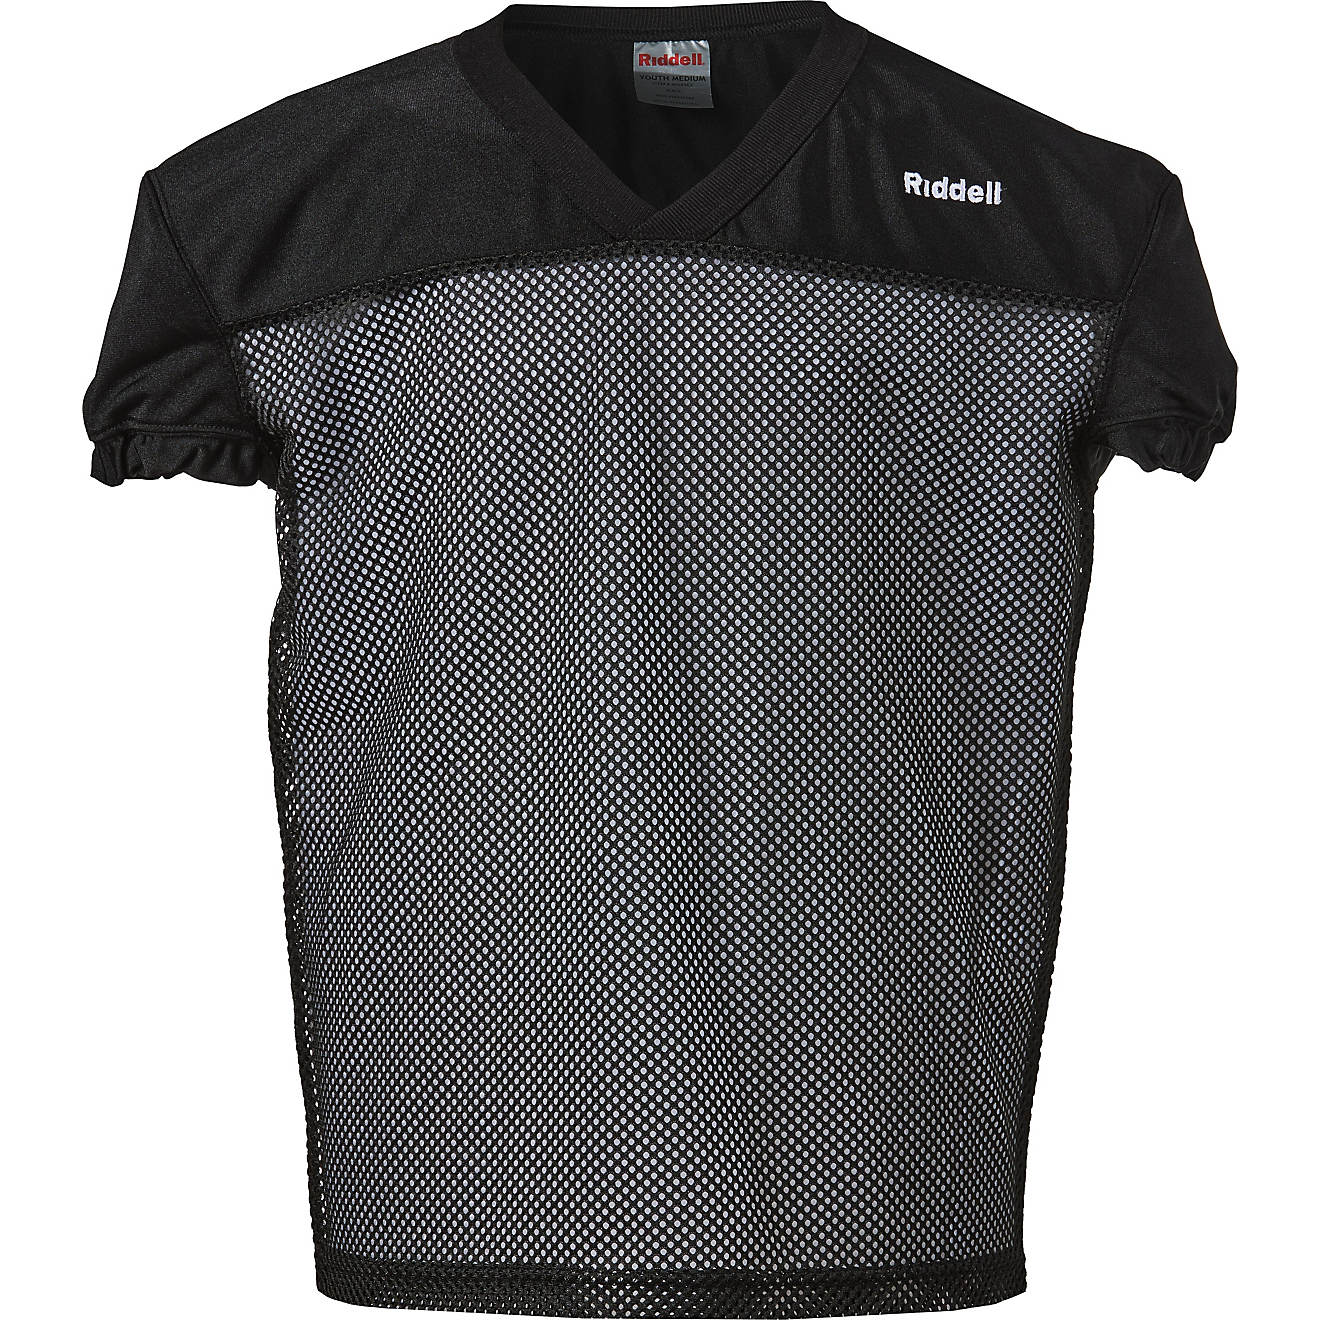 Riddell Men's Football Practice Jersey                                                                                           - view number 1